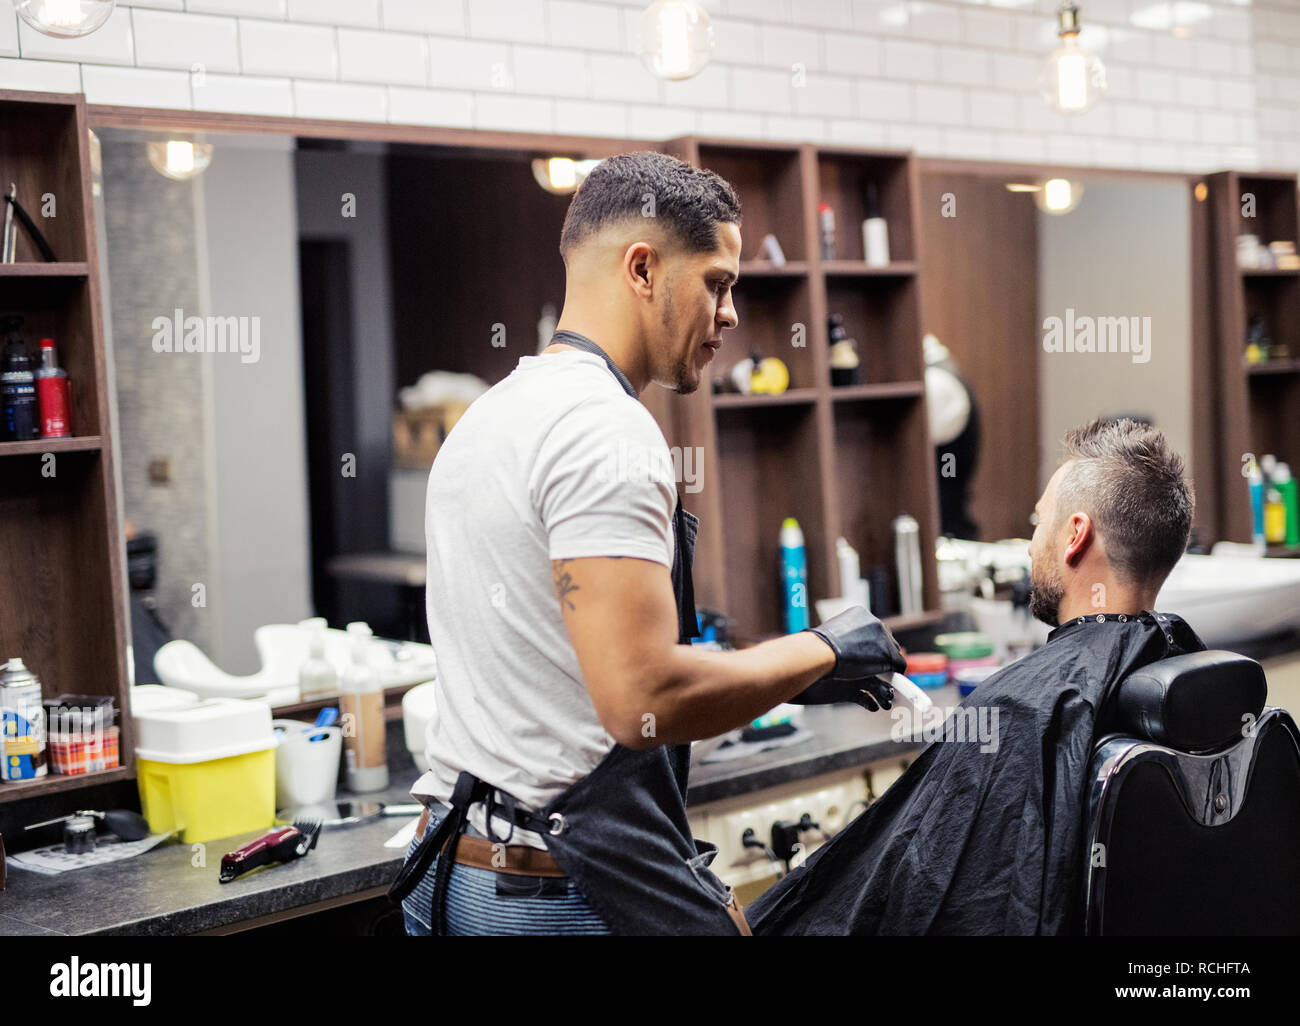 Rear view of man client visiting haidresser and hairstylist in barber shop. Stock Photo